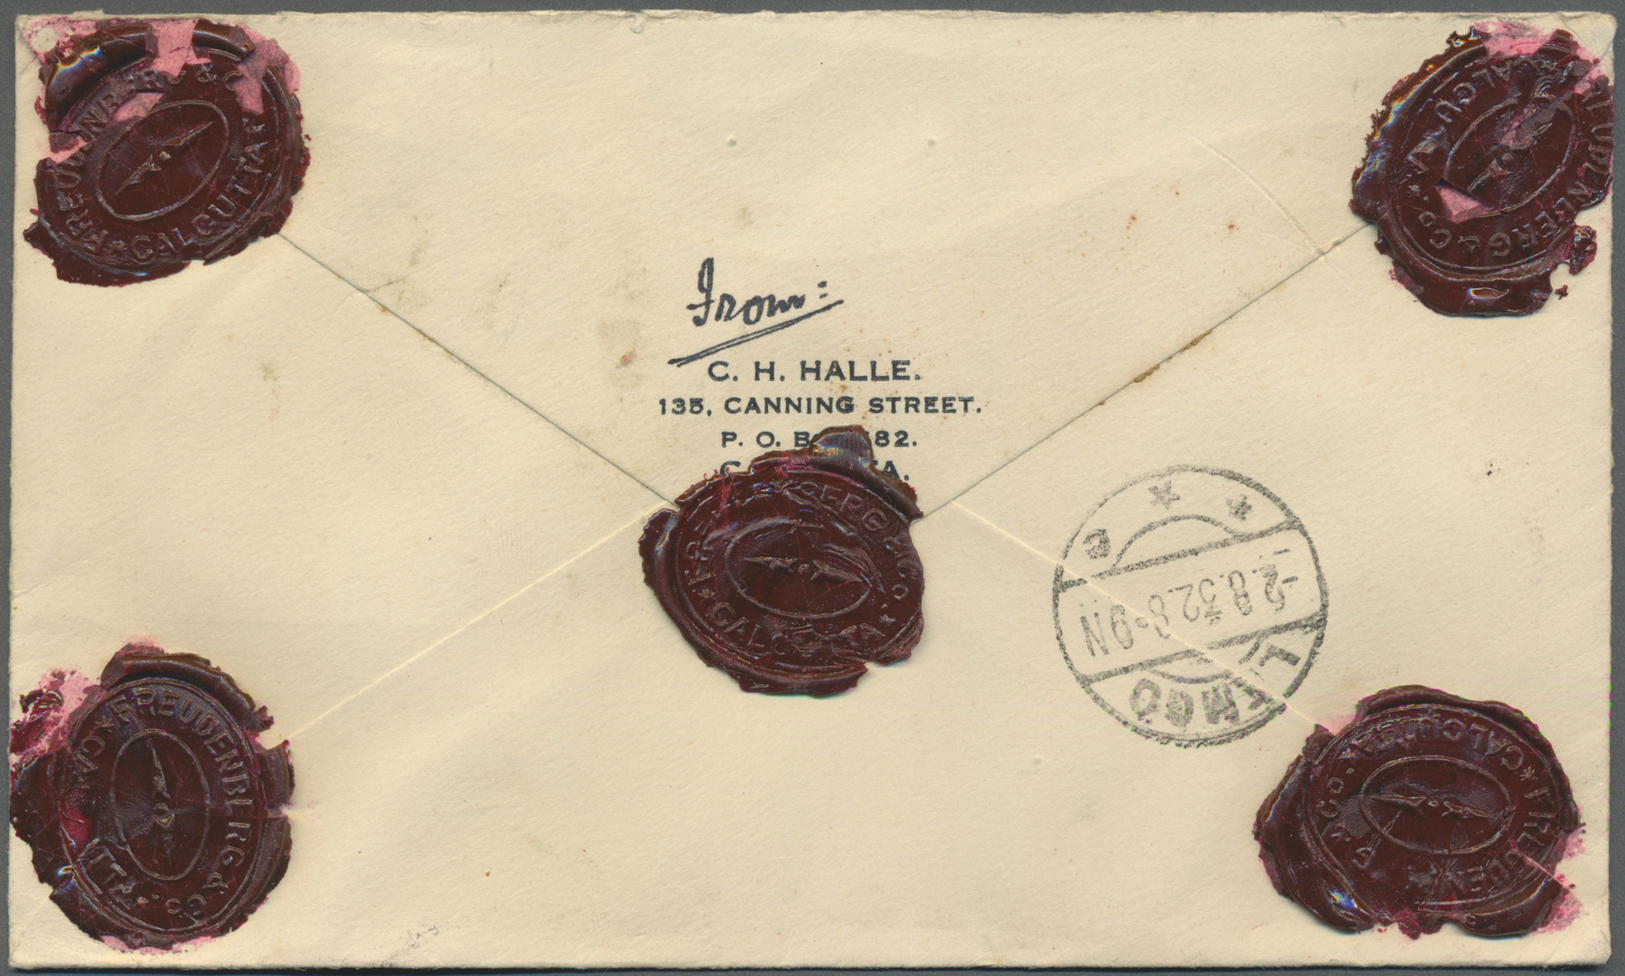 GA/Br Indien: 1897/1932, stationery envelopes (3, two uprated, one registered) used from "RANCHI, SAIDPUR and NAZPUR; an